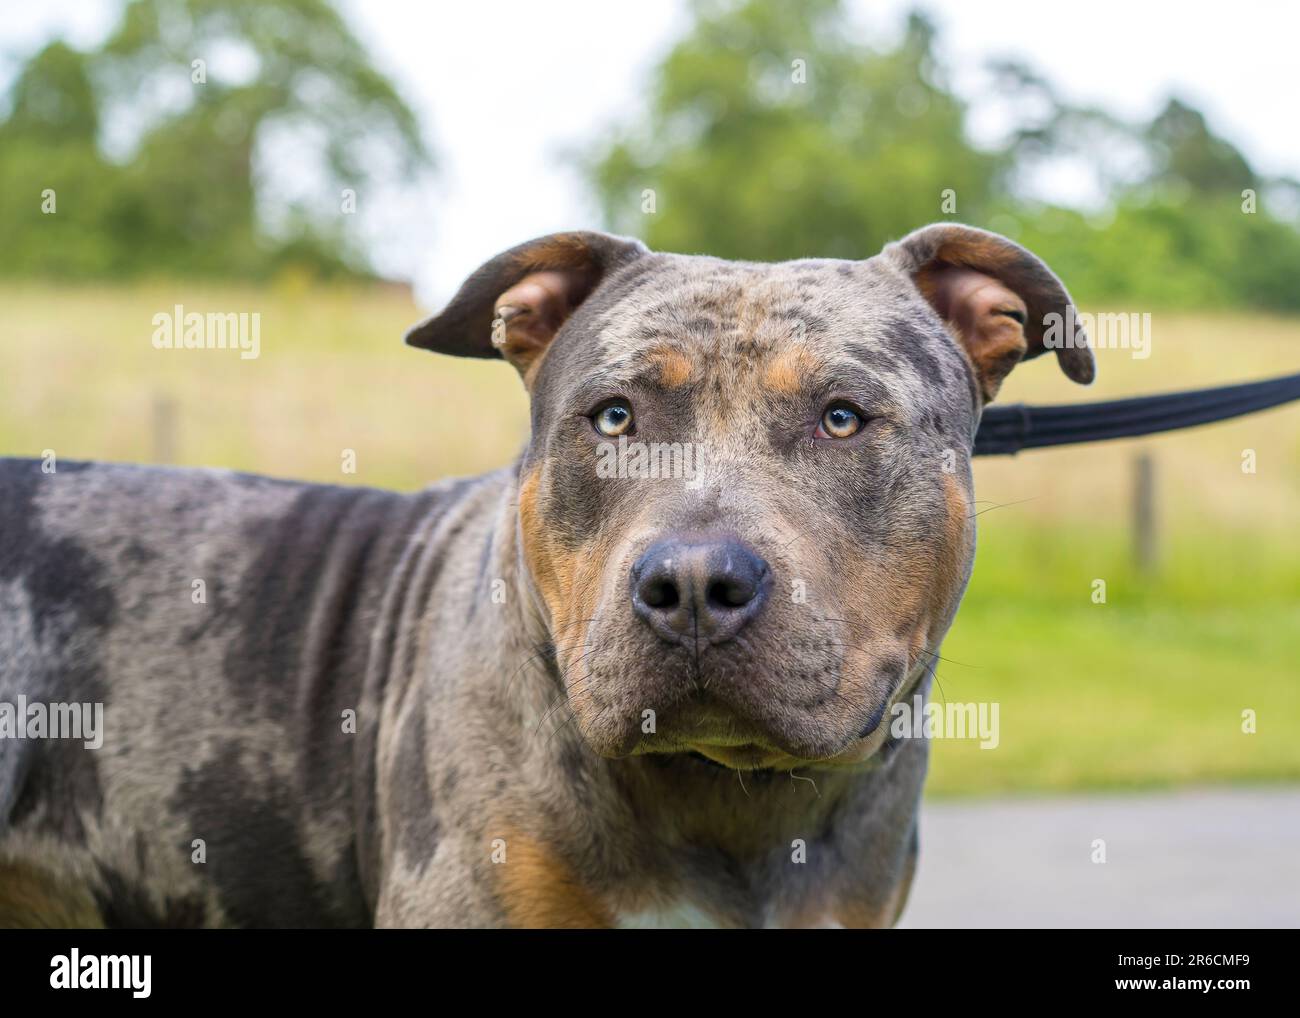 Dog mom American bully puppy dog, Pet funny and Cute Stock Photo - Alamy